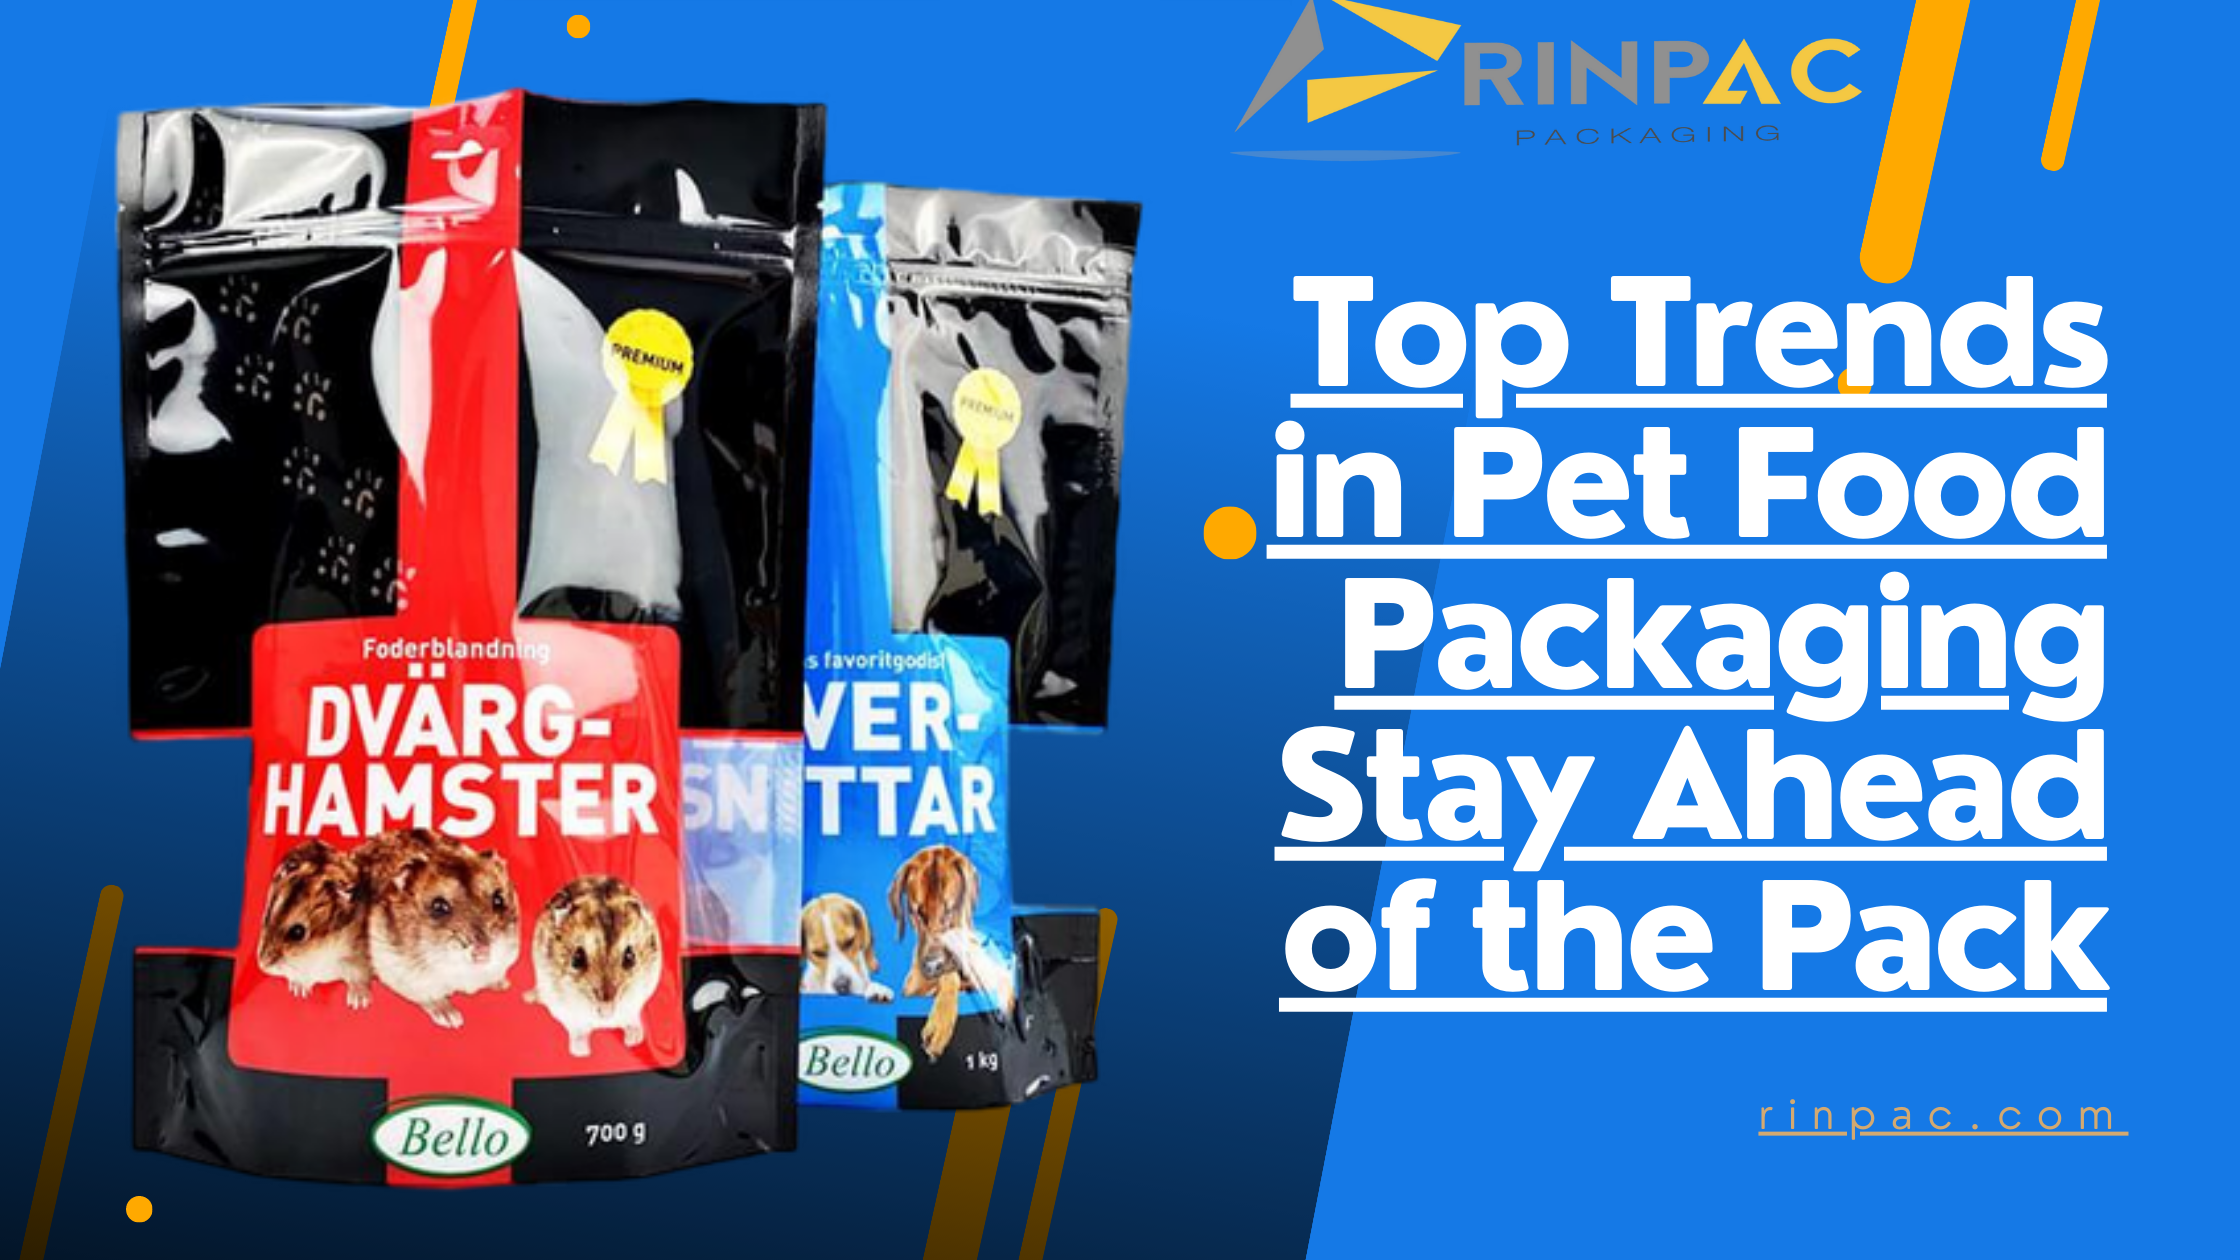 Top Trends in Pet Food Packaging Stay Ahead of the Pack